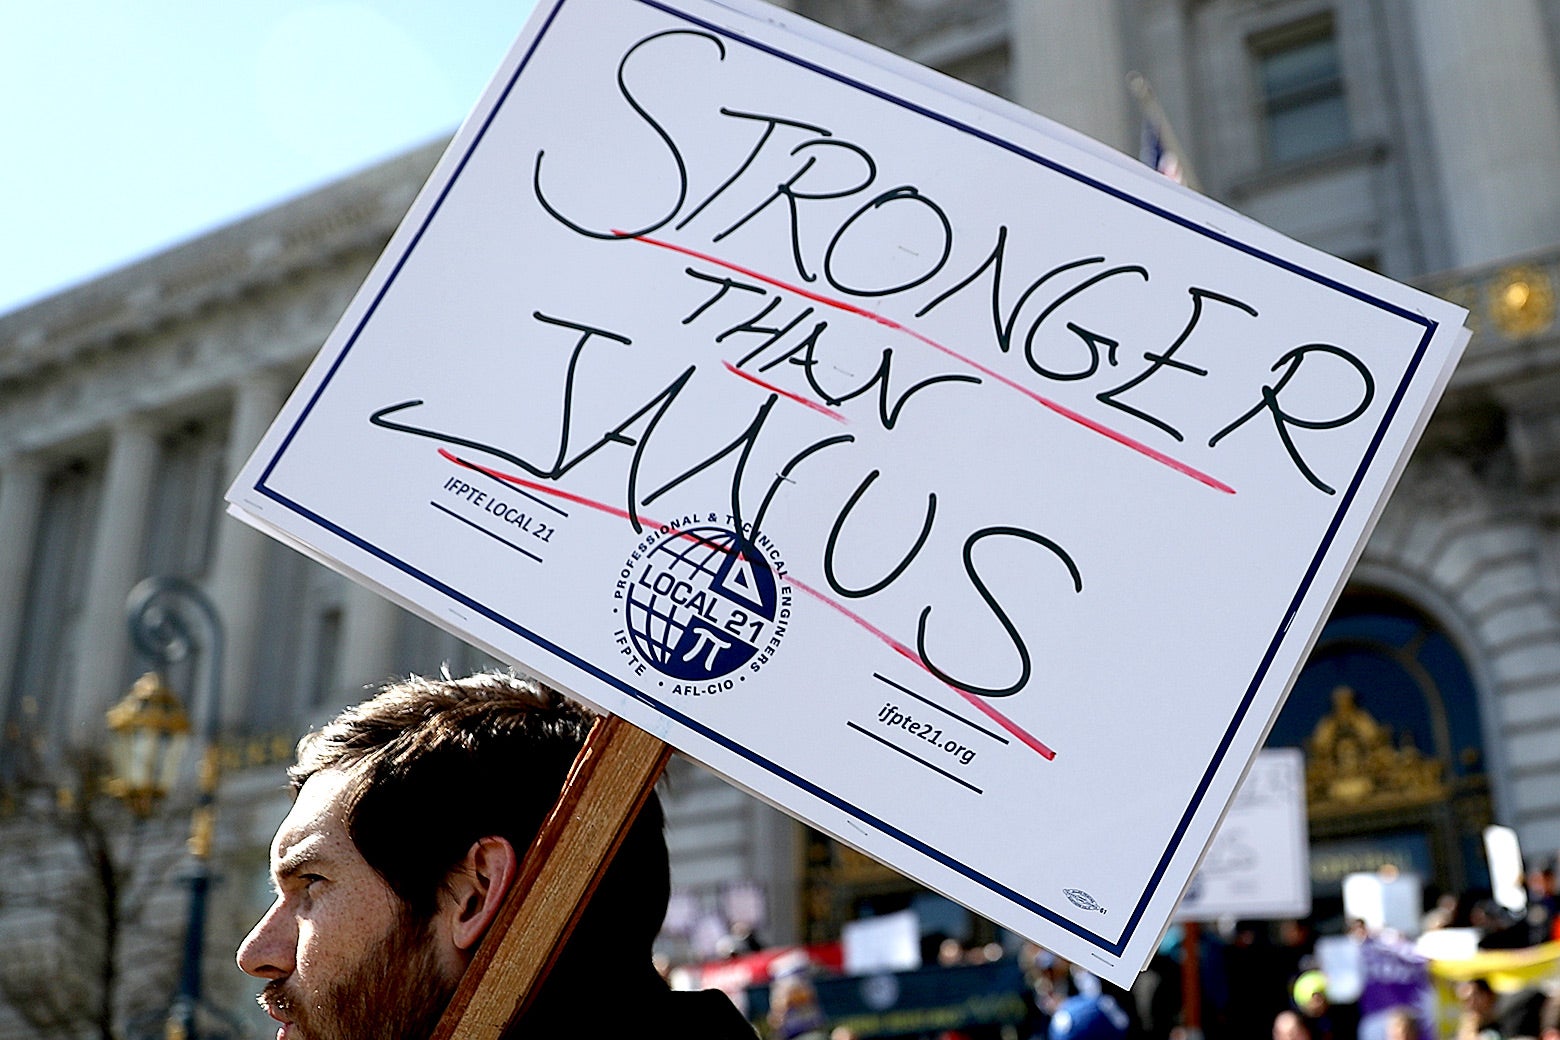 A union member protesting outside San Francisco City Hall holds a sign reading "STRONGER THAN JANUS."